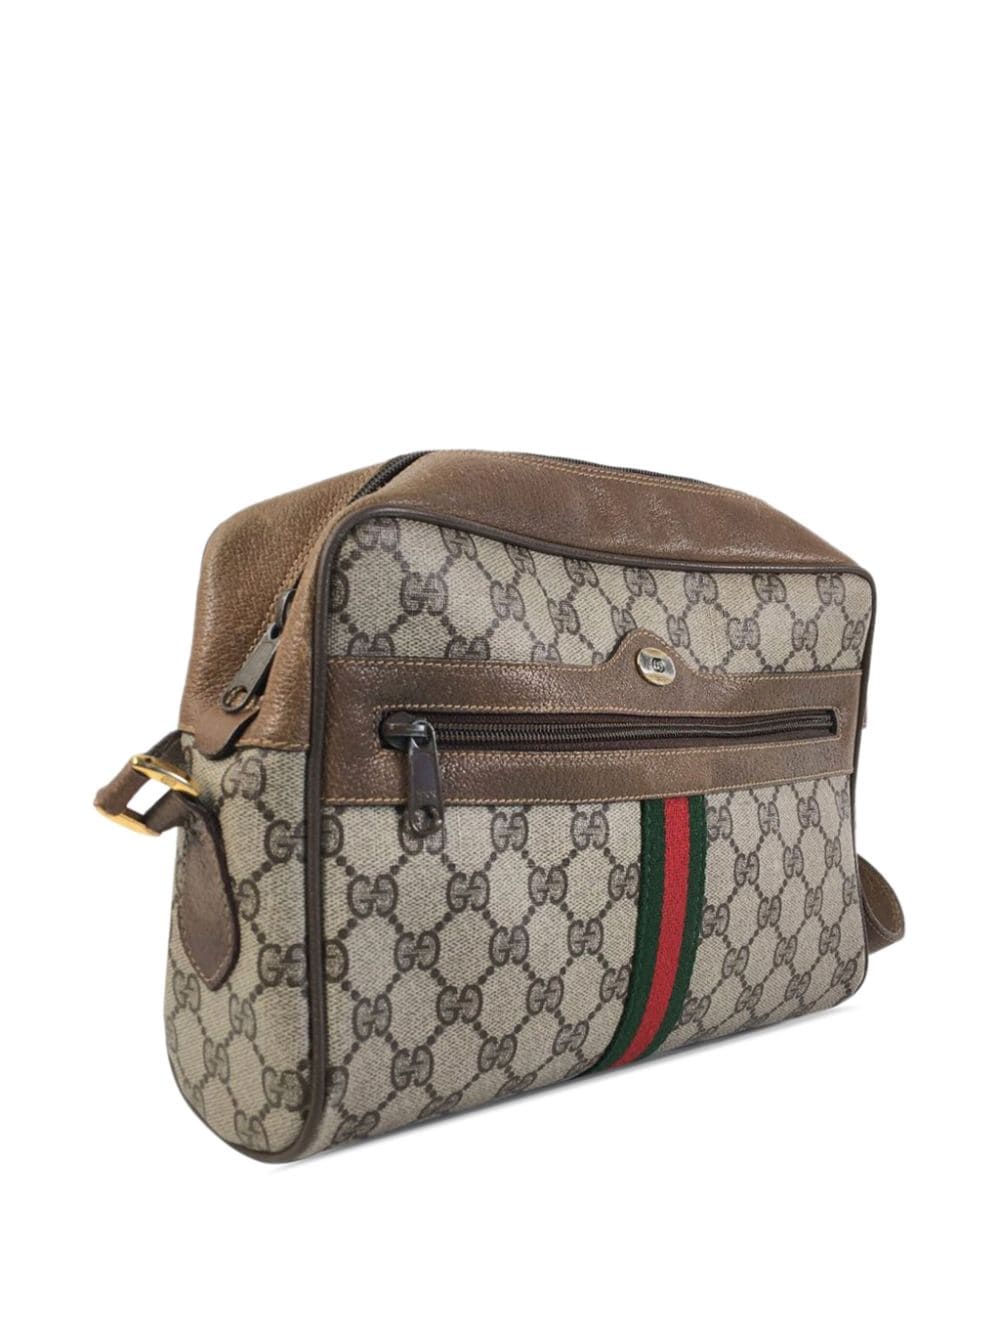 Pre-owned Gucci 2000-2010 Gg Supreme Ophidia Crossbody Bag In 褐色